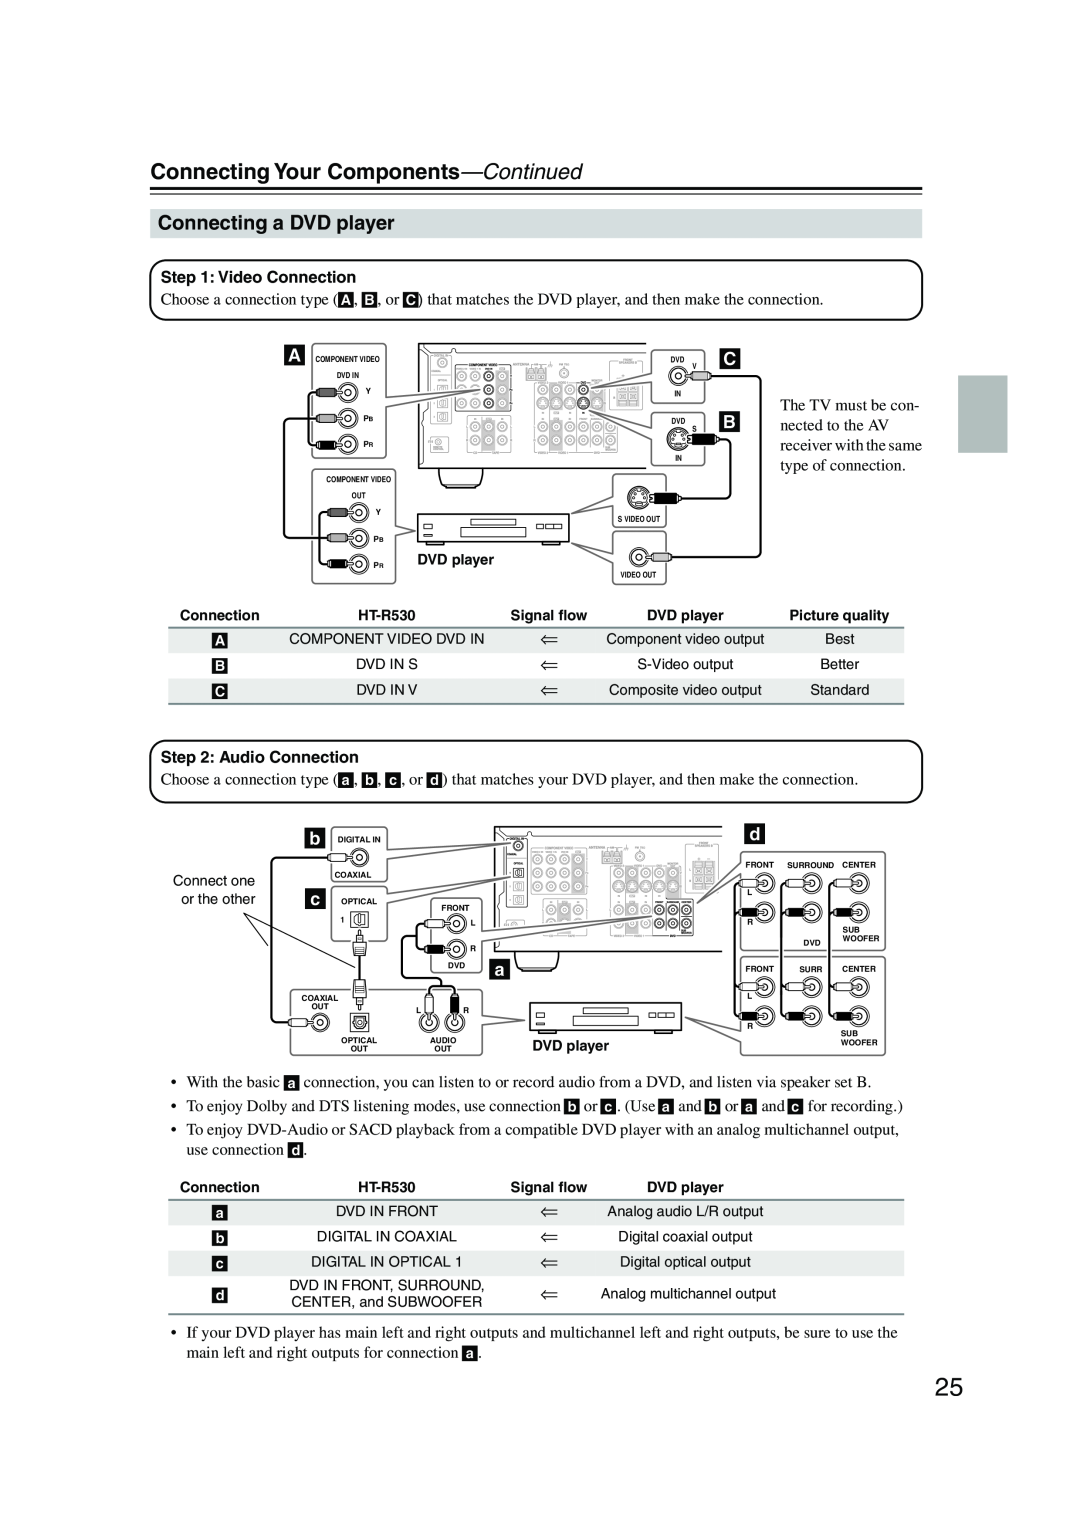 Onkyo HT-S780 instruction manual Connecting a DVD player, Connecting Your Components—Continued 